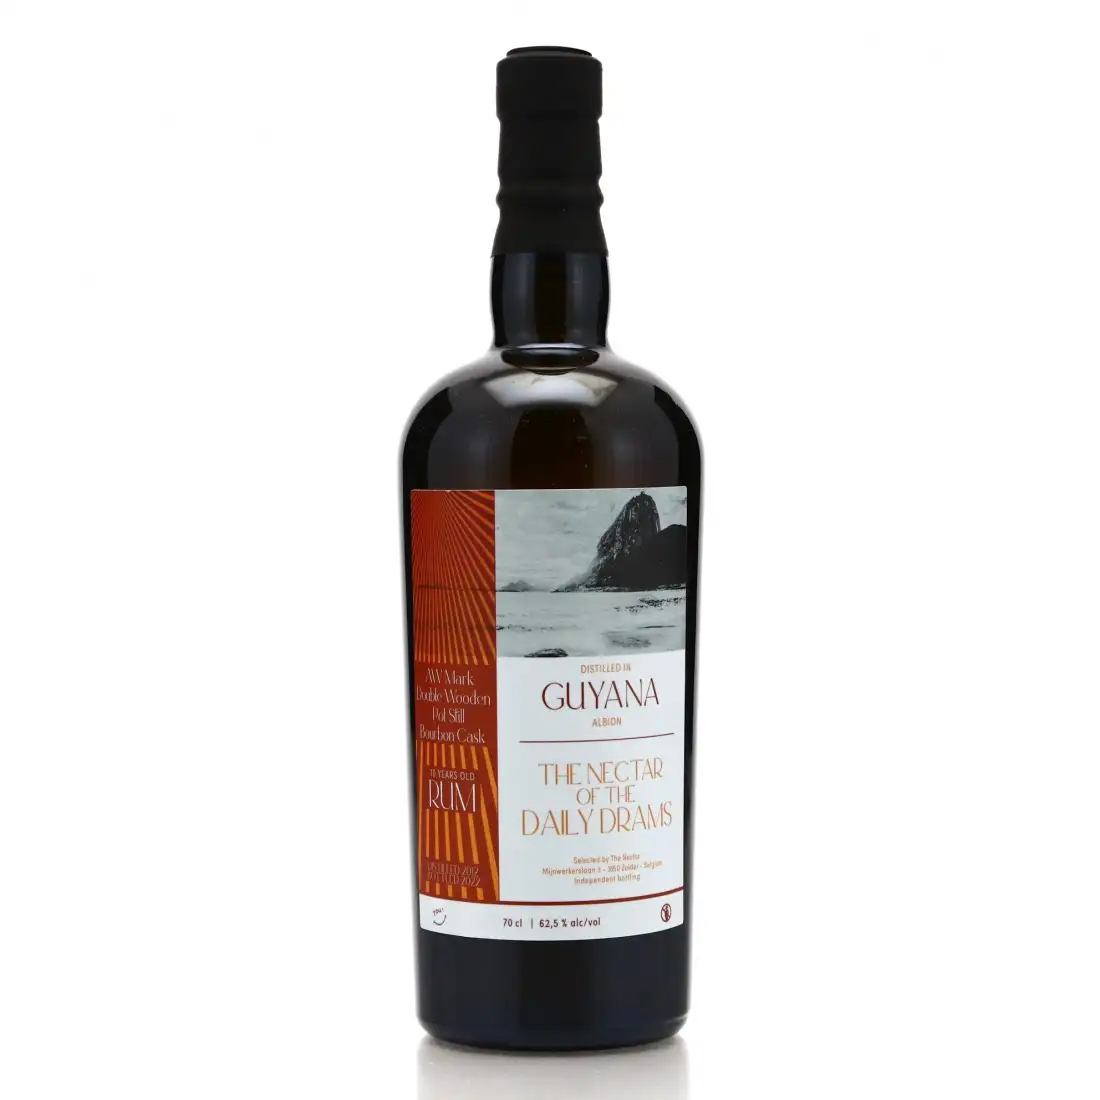 Image of the front of the bottle of the rum The Nectar Of The Daily Drams Guyana AW